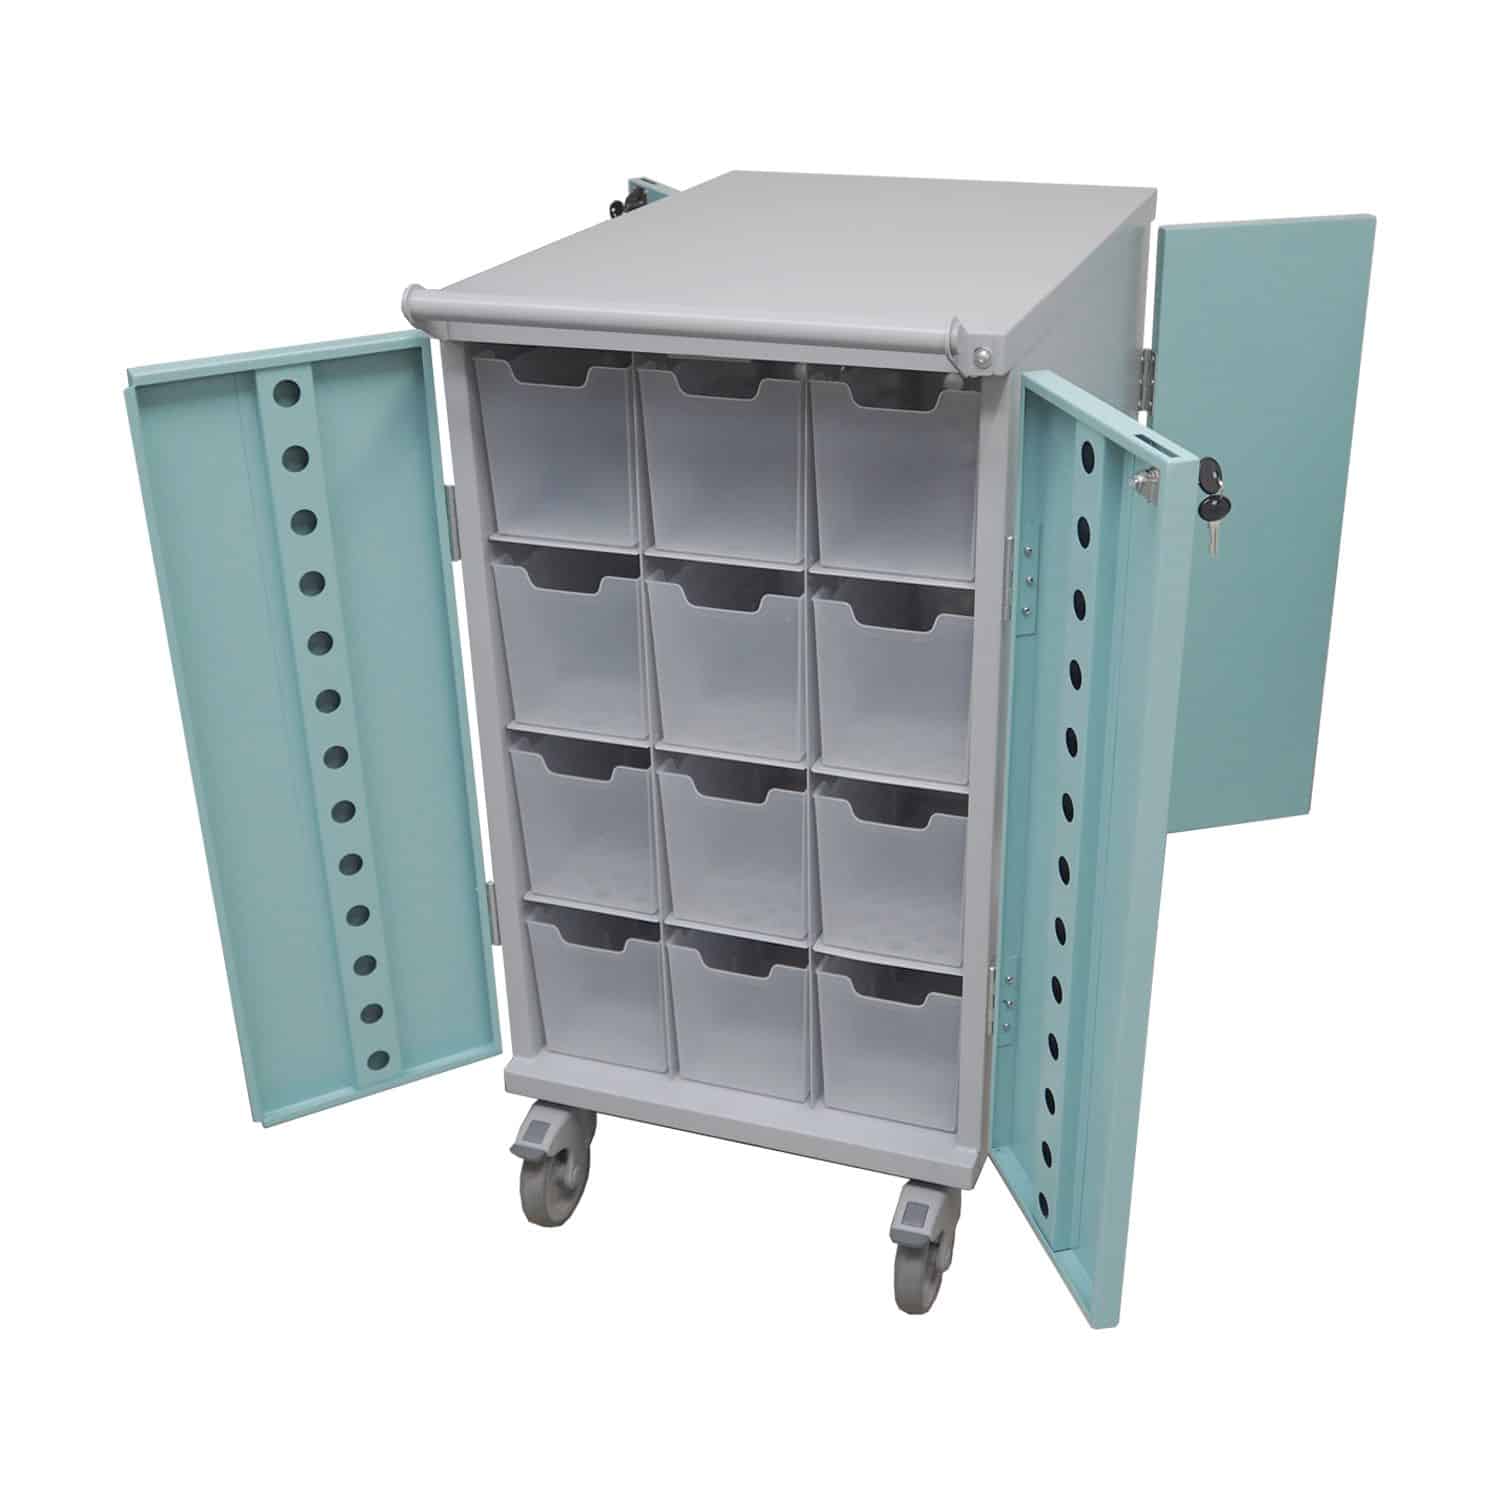 Original Packaging 24/48 Compartment Trolley (TRO010) 535W x 1035H x 870D